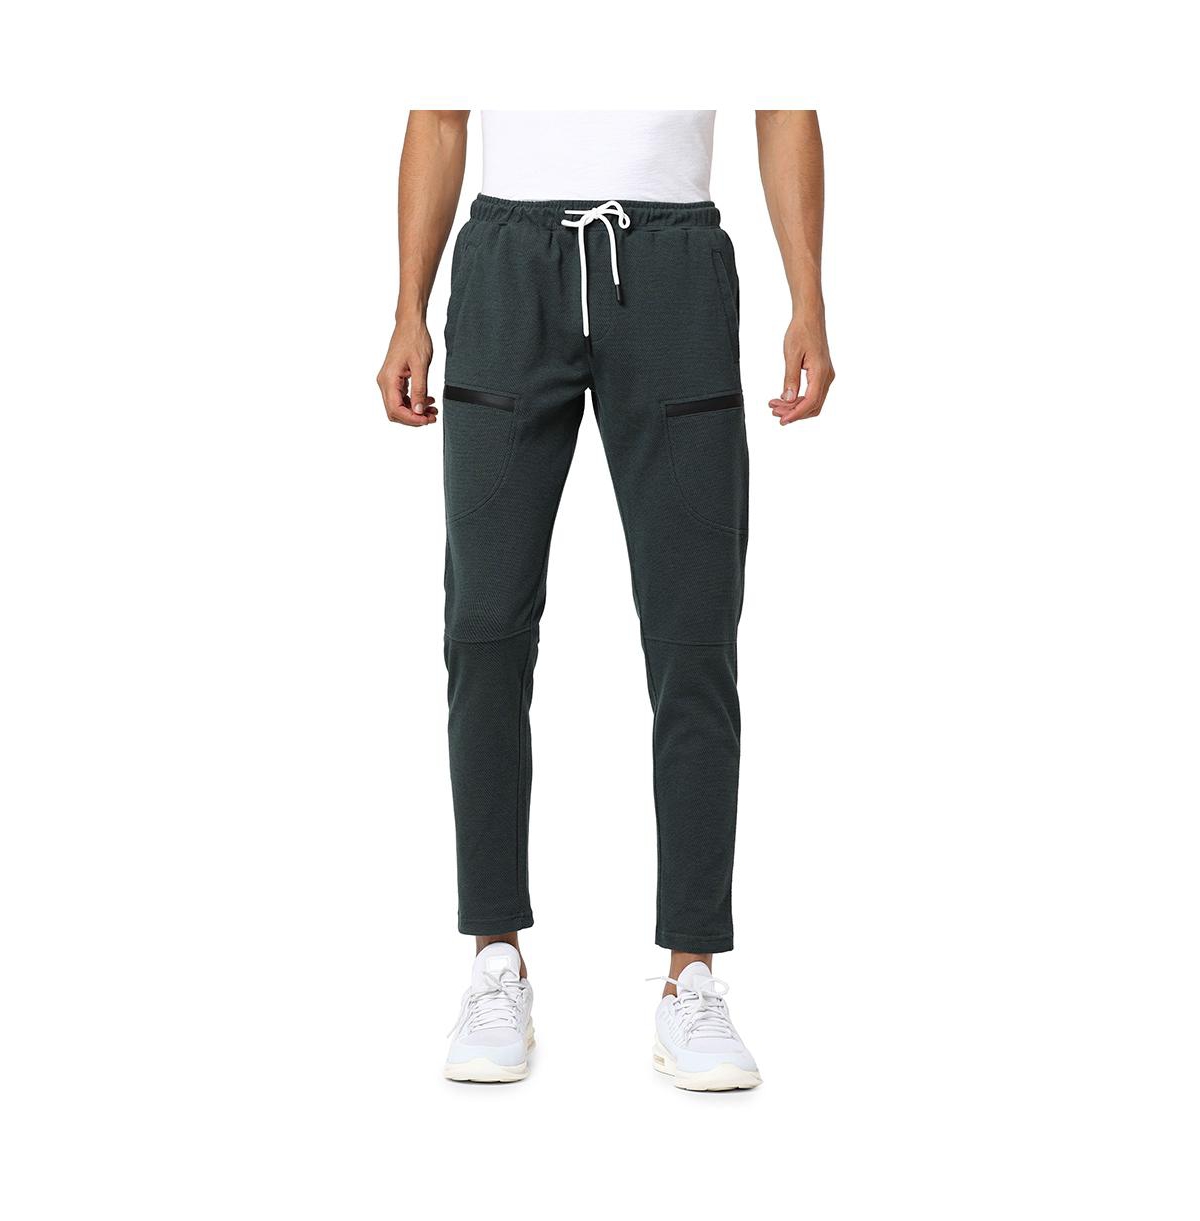 Men's Forest Green Basic Casual Joggers - Forest green